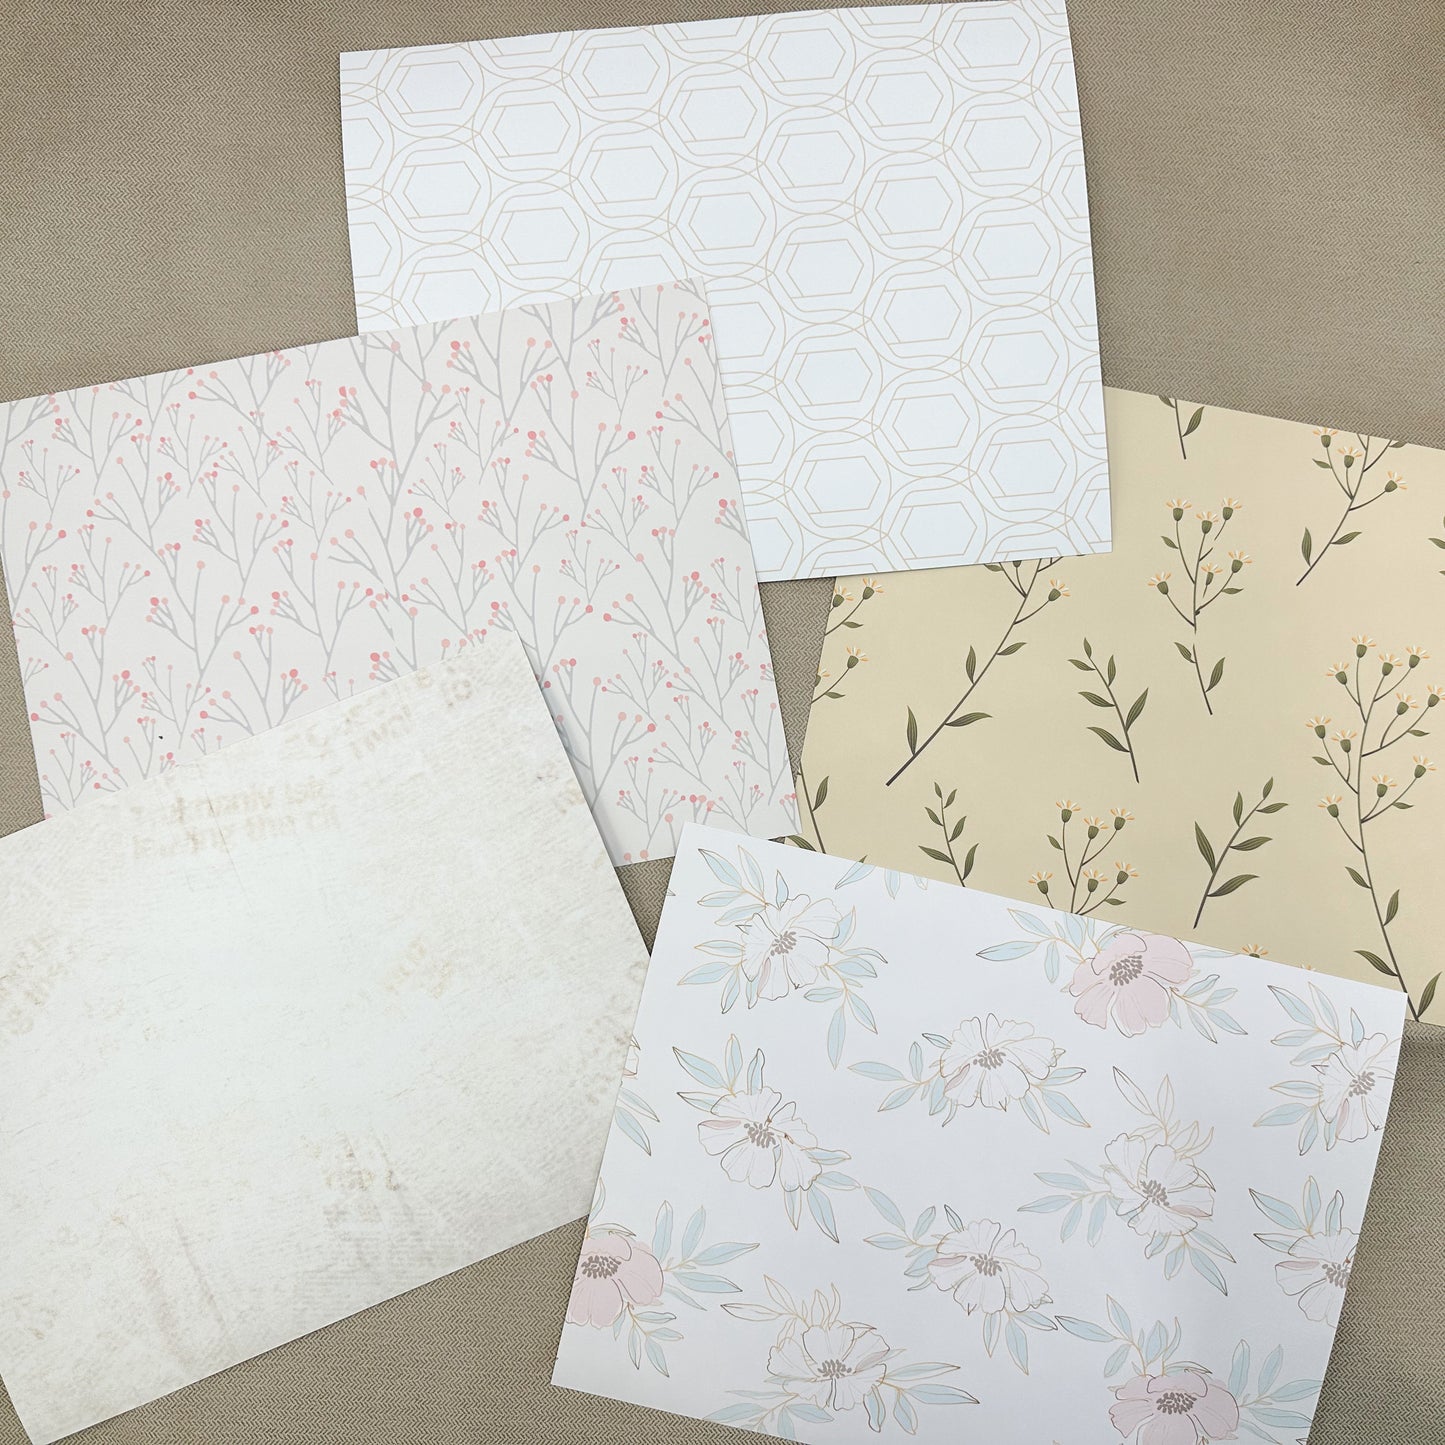 Double-Sided Paper Pack- Vintage Floral